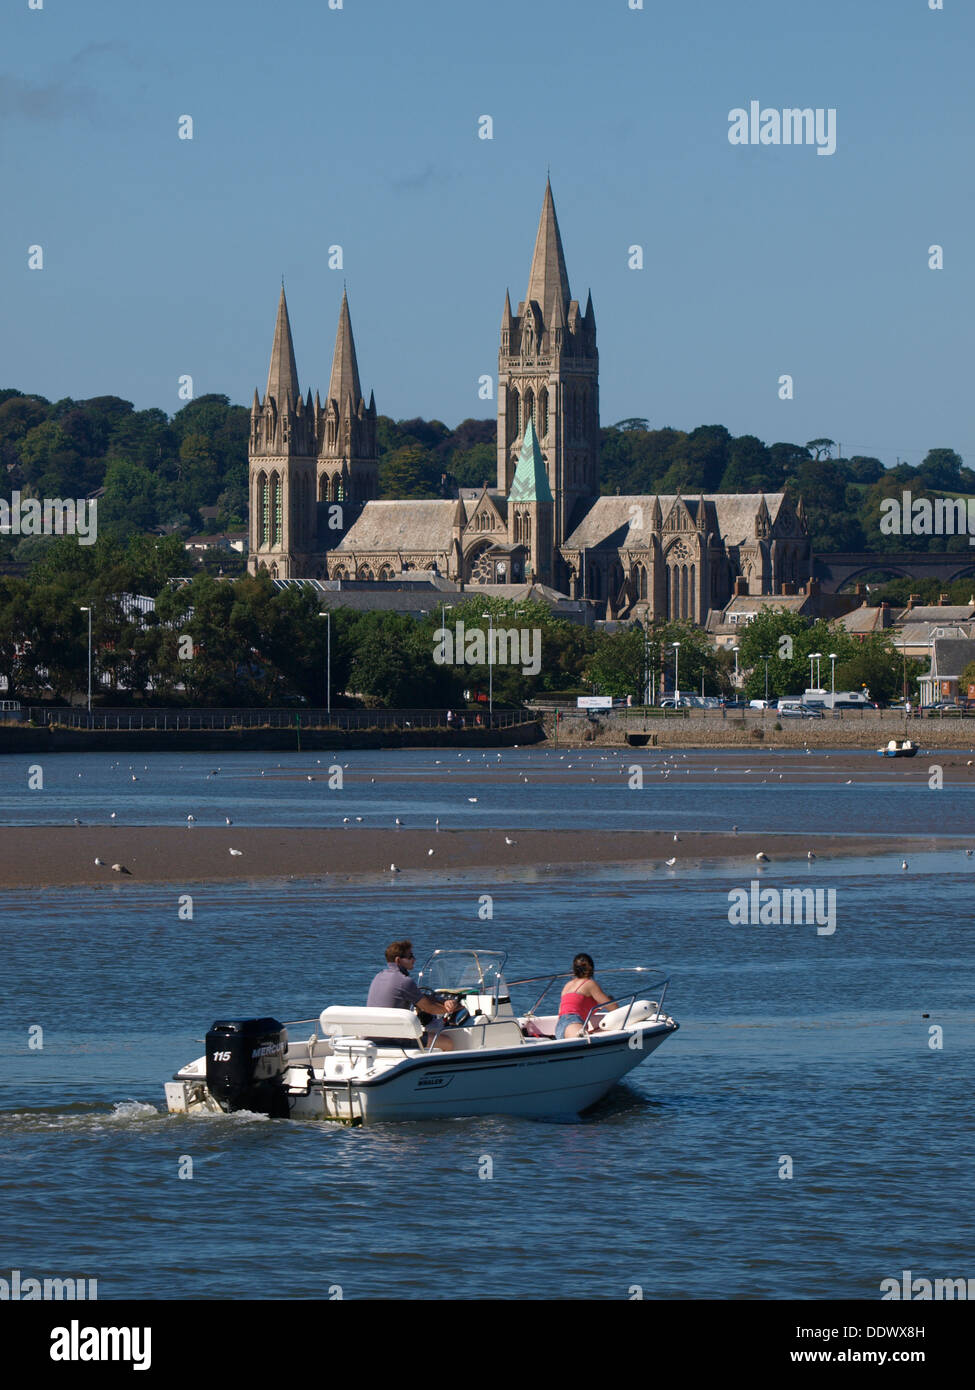 Truro Cathedral with a boat on the River Fal, Cornwall, UK 2013 Stock Photo